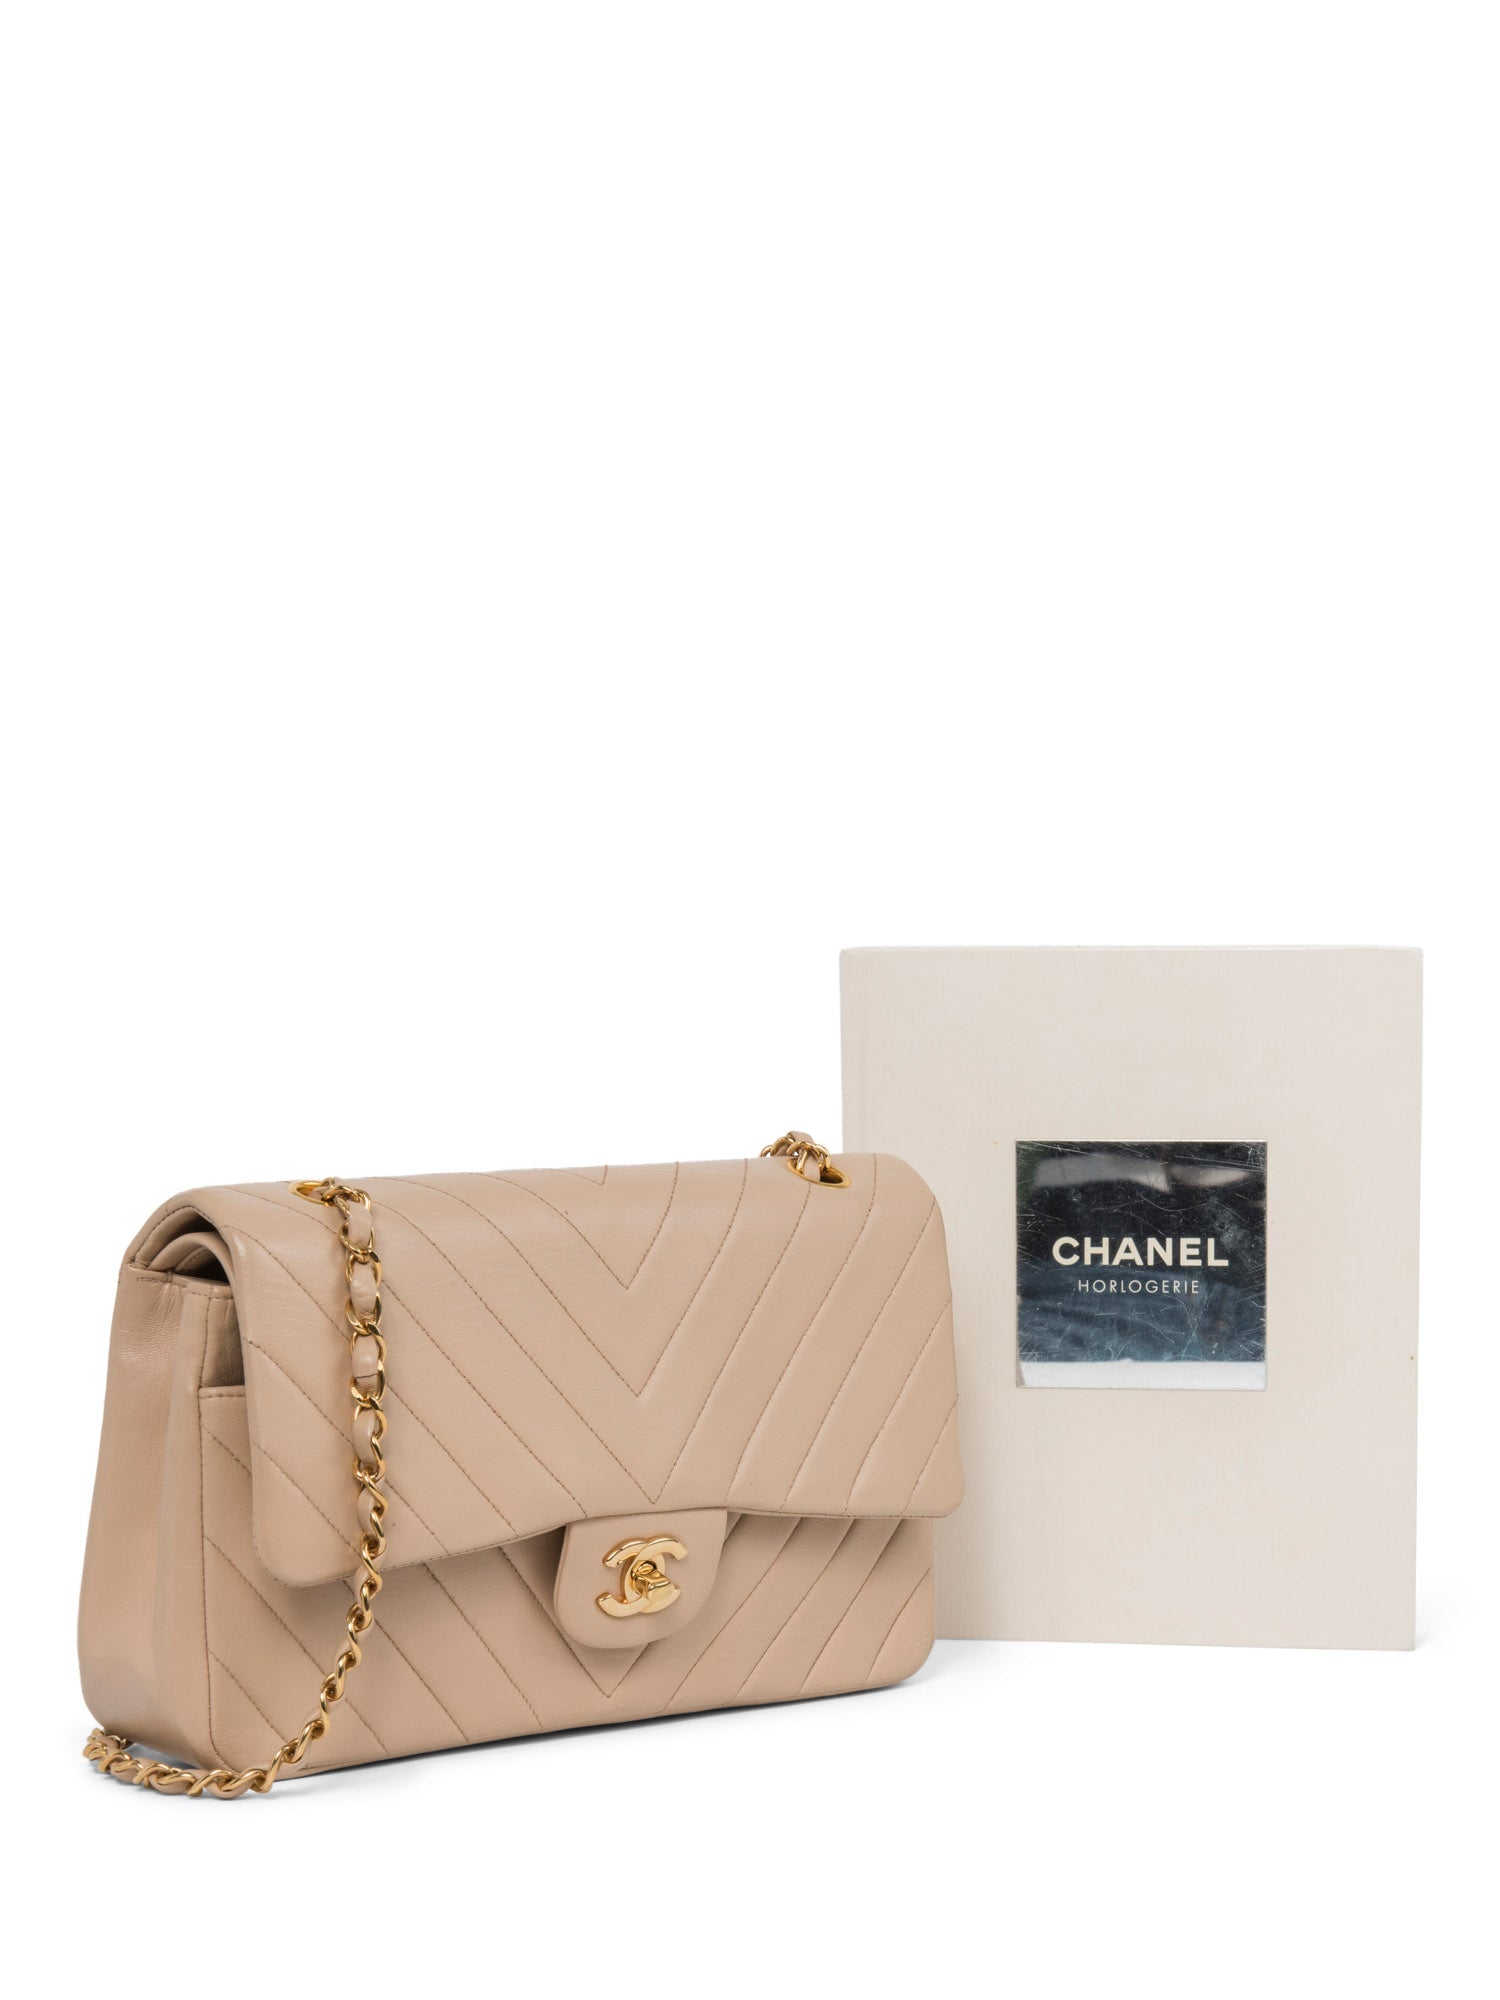 A Quick Guide to Chanel Flap Bags